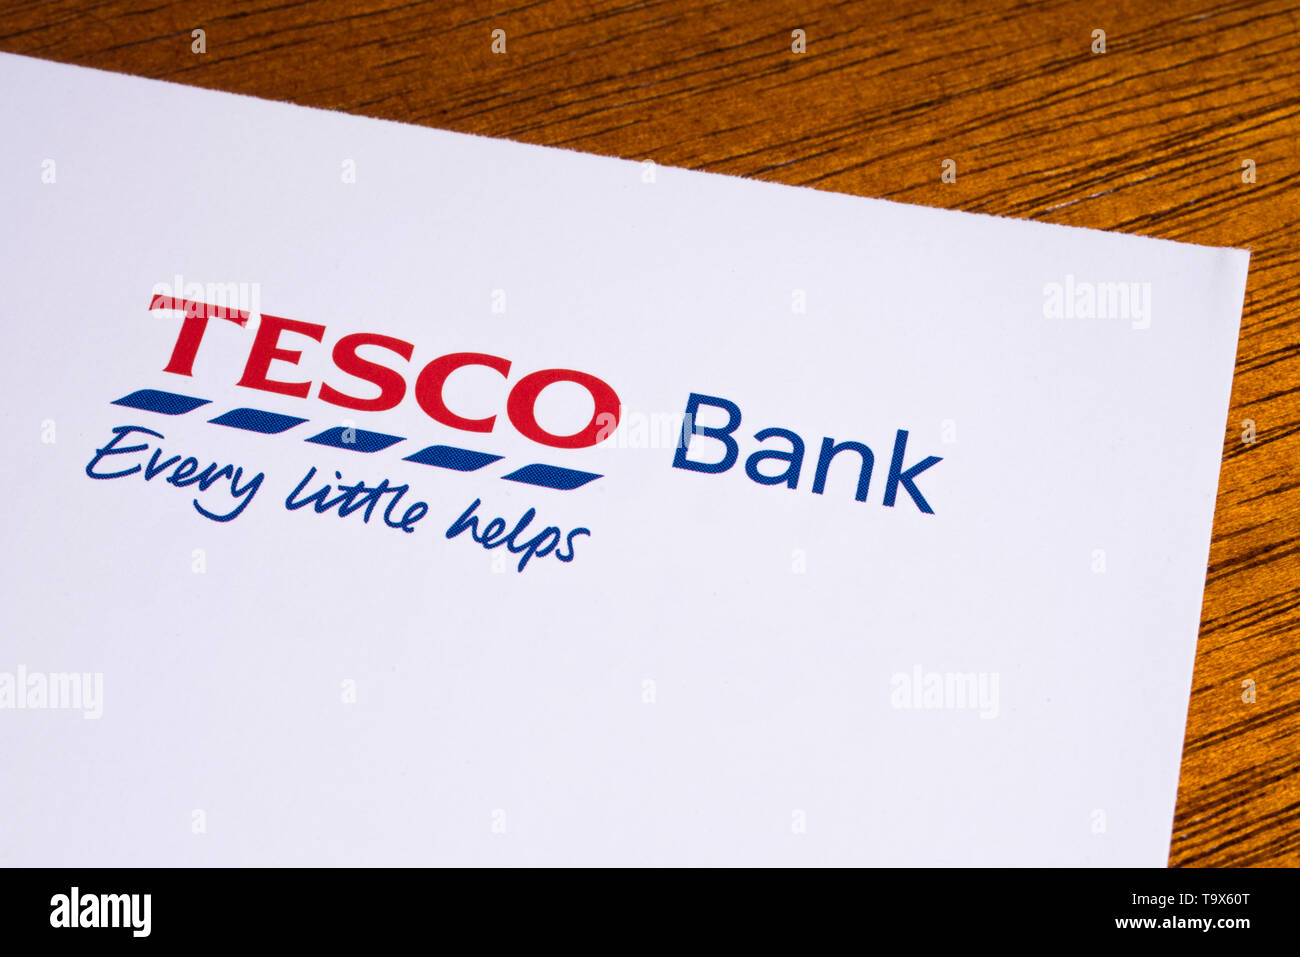 London, UK - May 14th 2019: The logo of Tesco Bank, pictured on the top of an information leaflet. Stock Photo